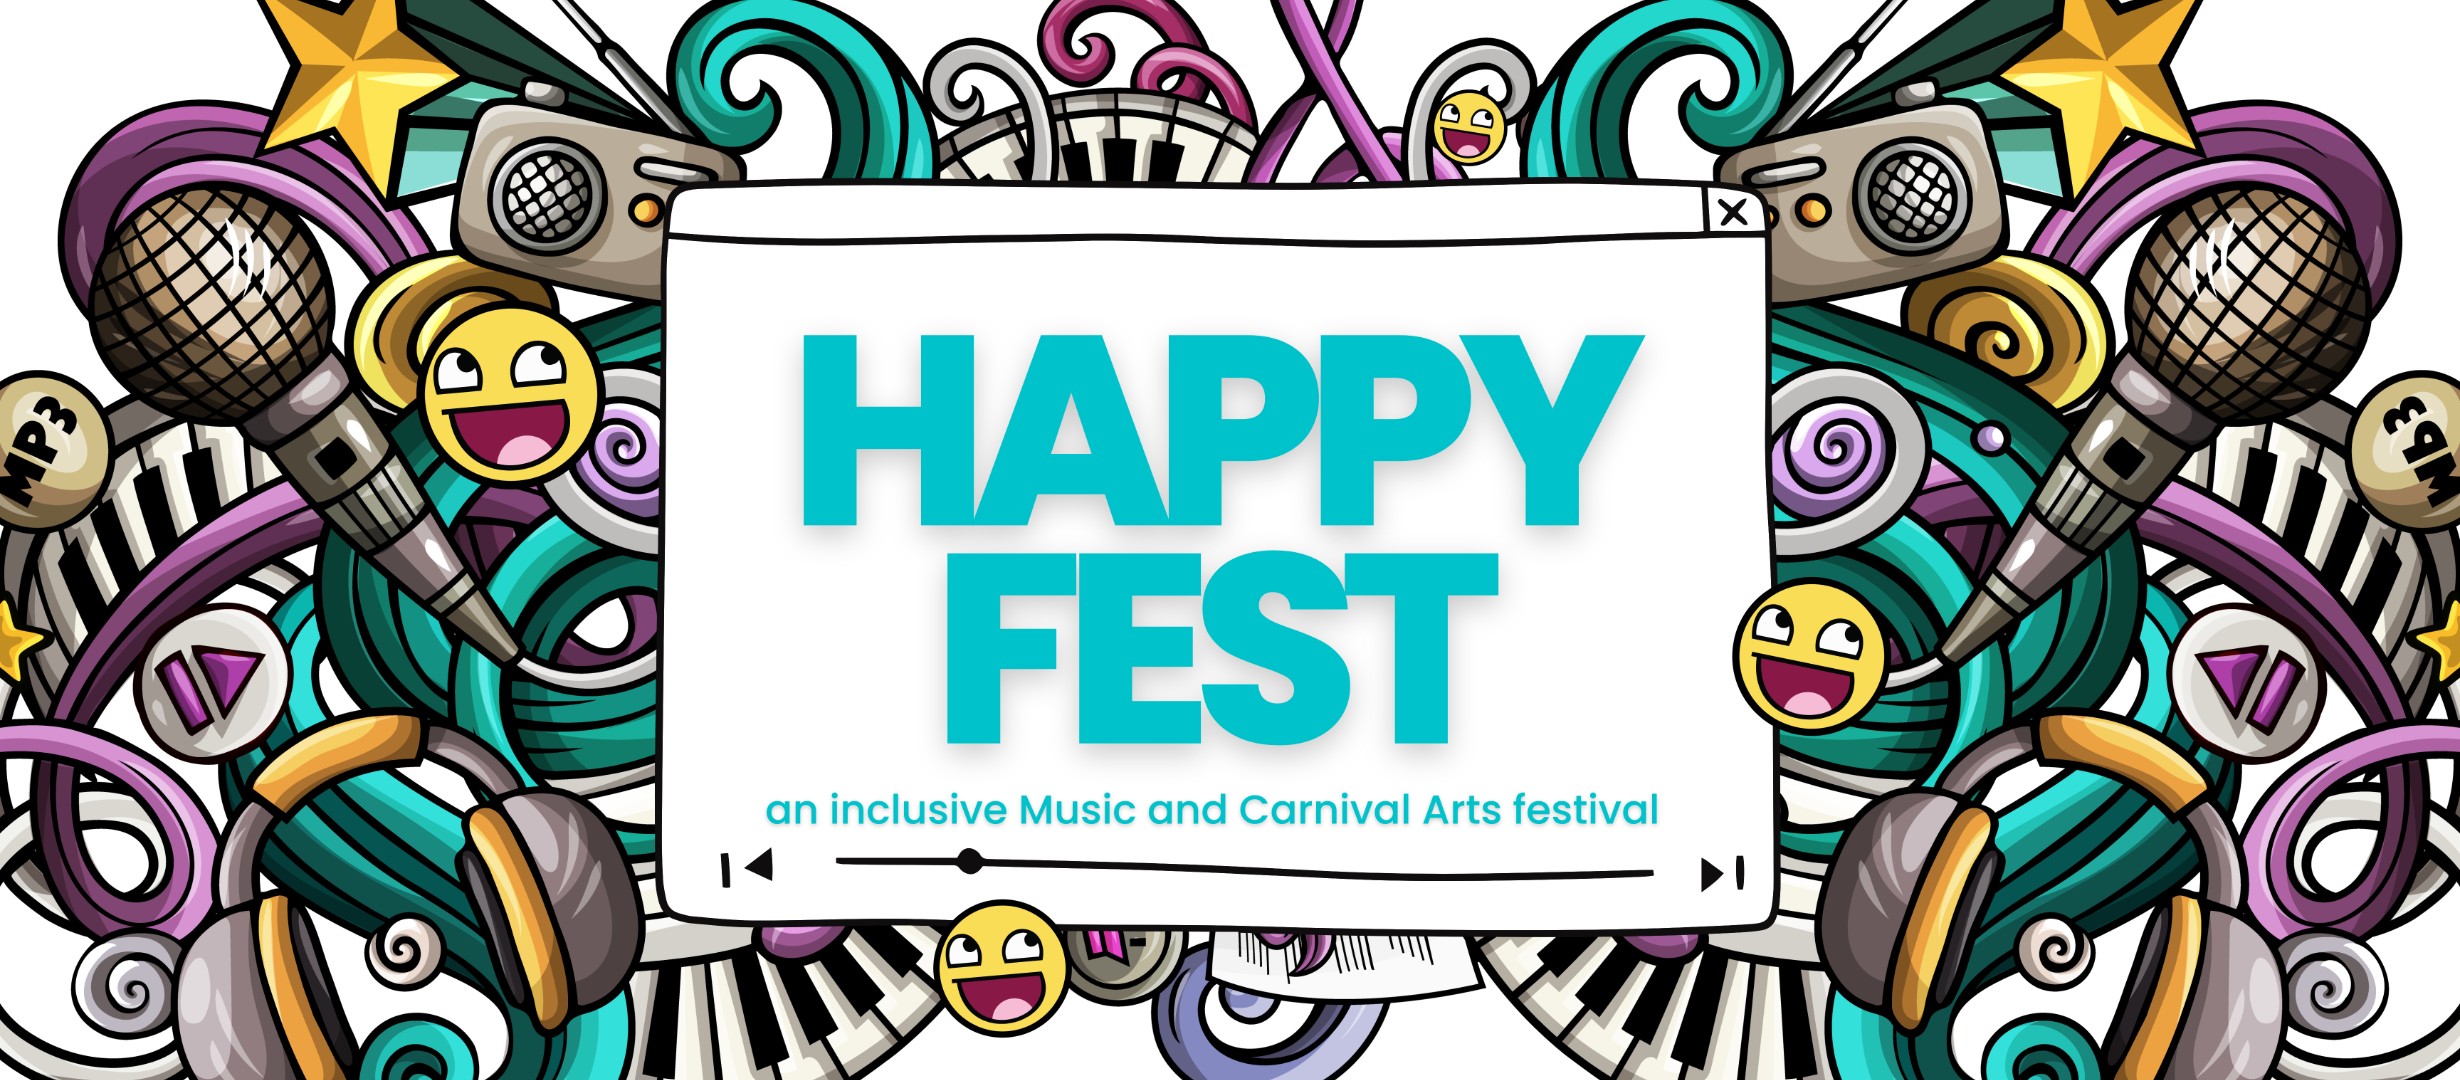 This image is full of colour, showing mirophones, keyboards, speakers , headphones and happy faces - sharing the title of this event: HappyFest